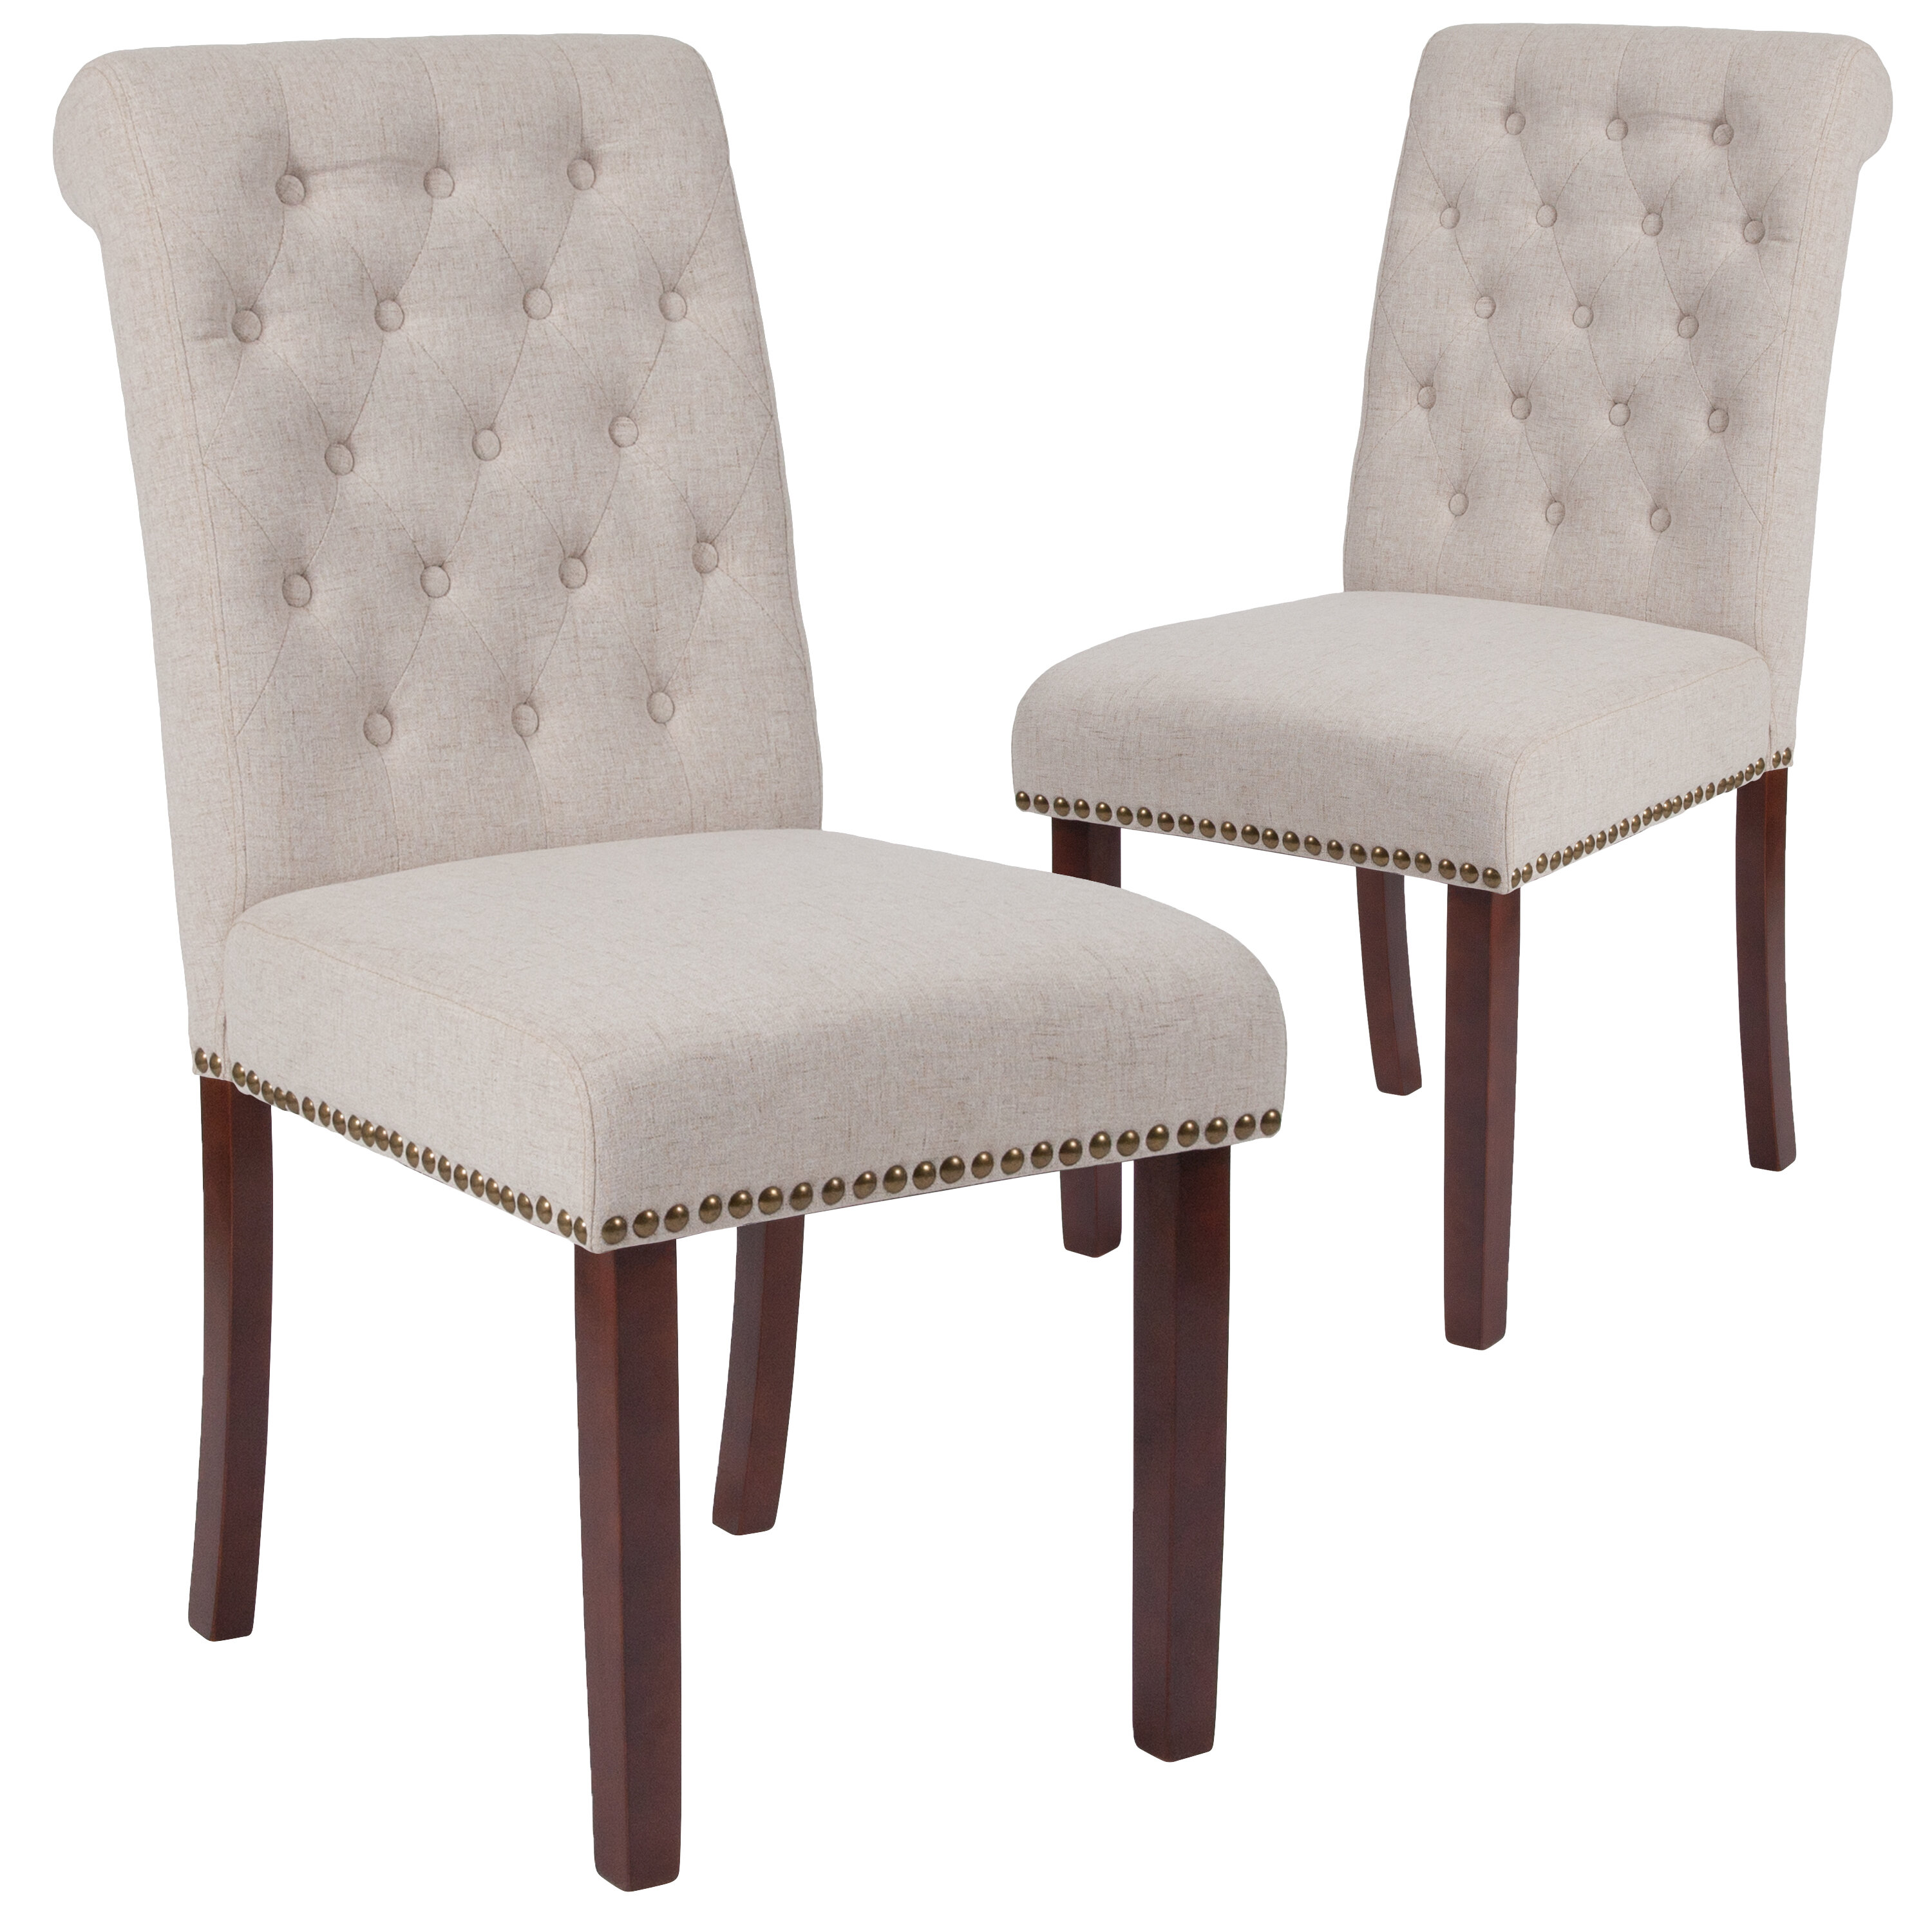 Chair Upholstery - Upholstery